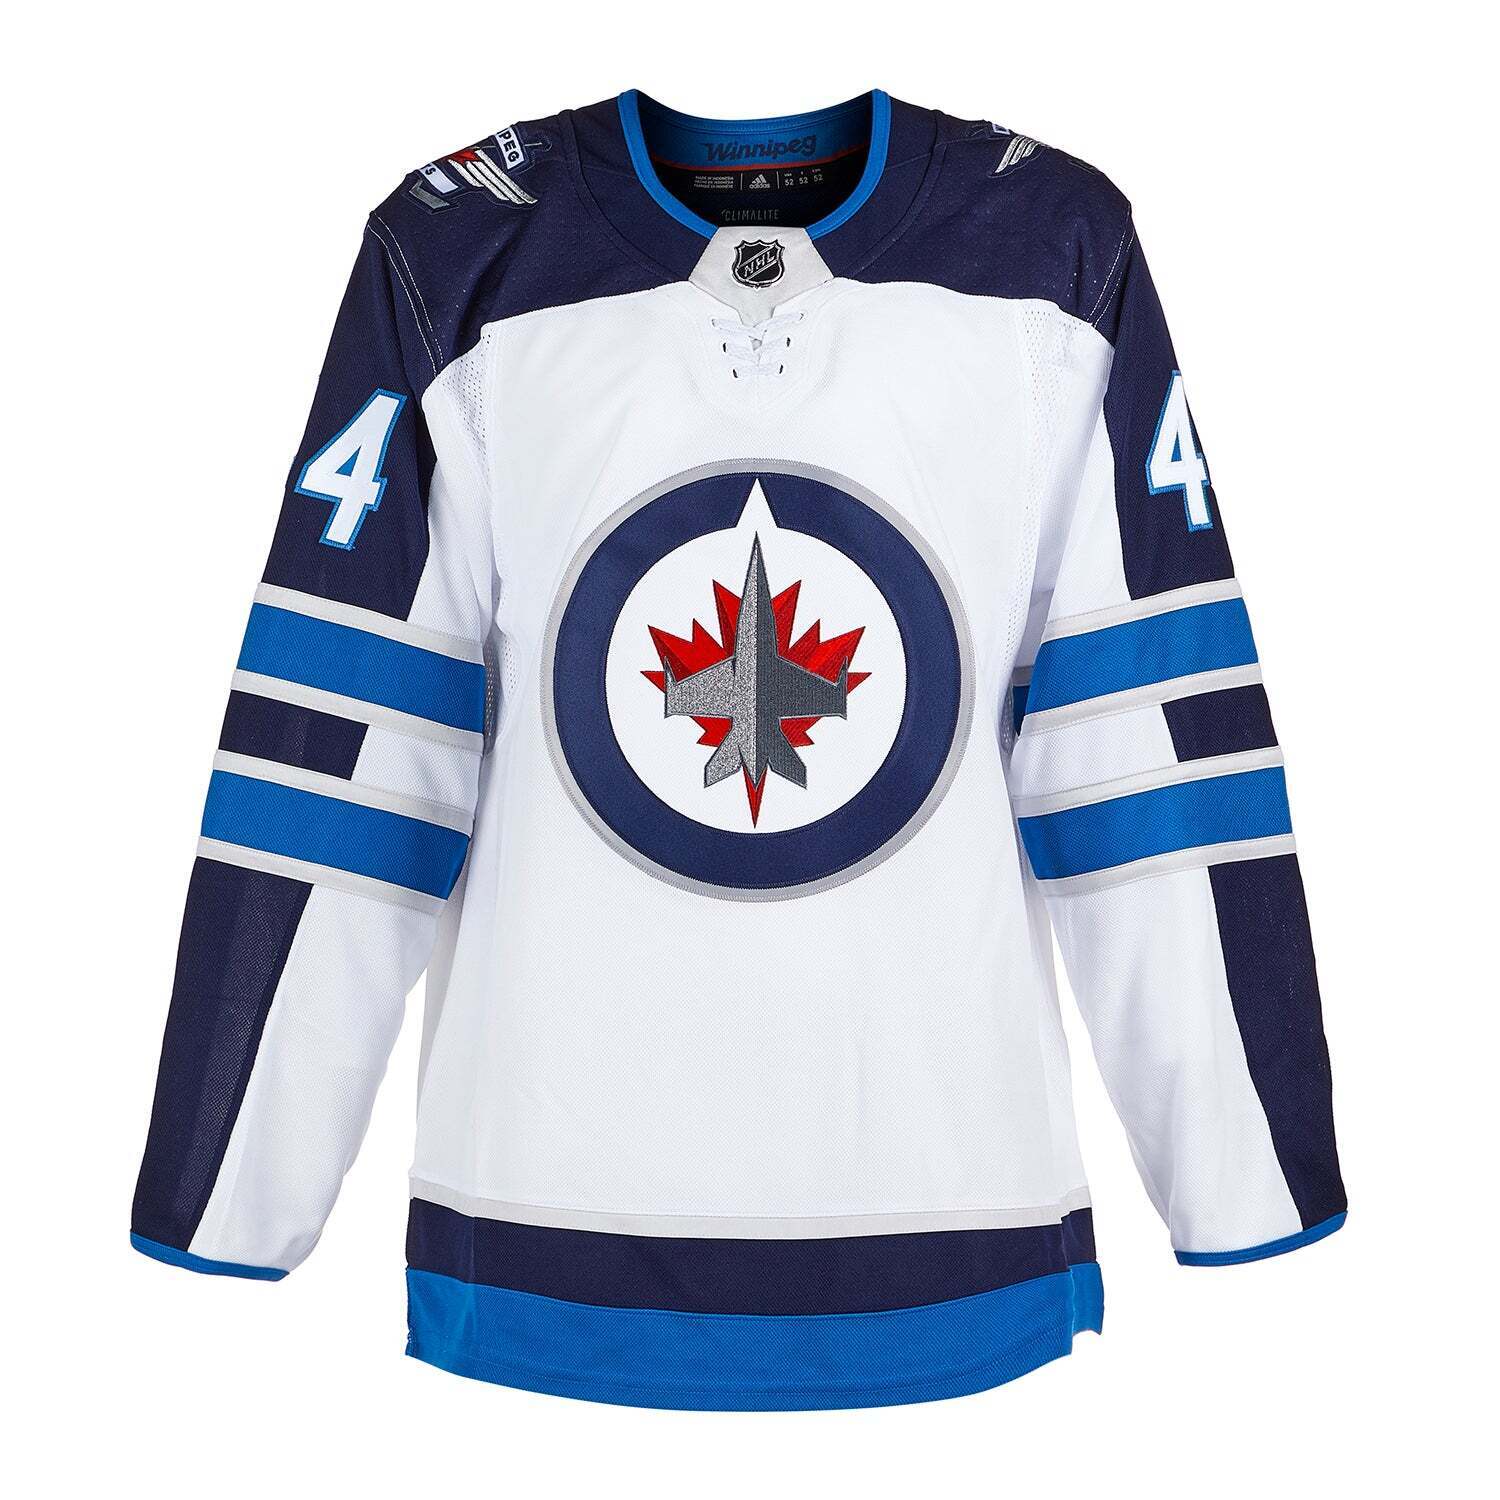 Connor Hellebuyck Autographed Winnipeg Jets 2019 Heritage Classic